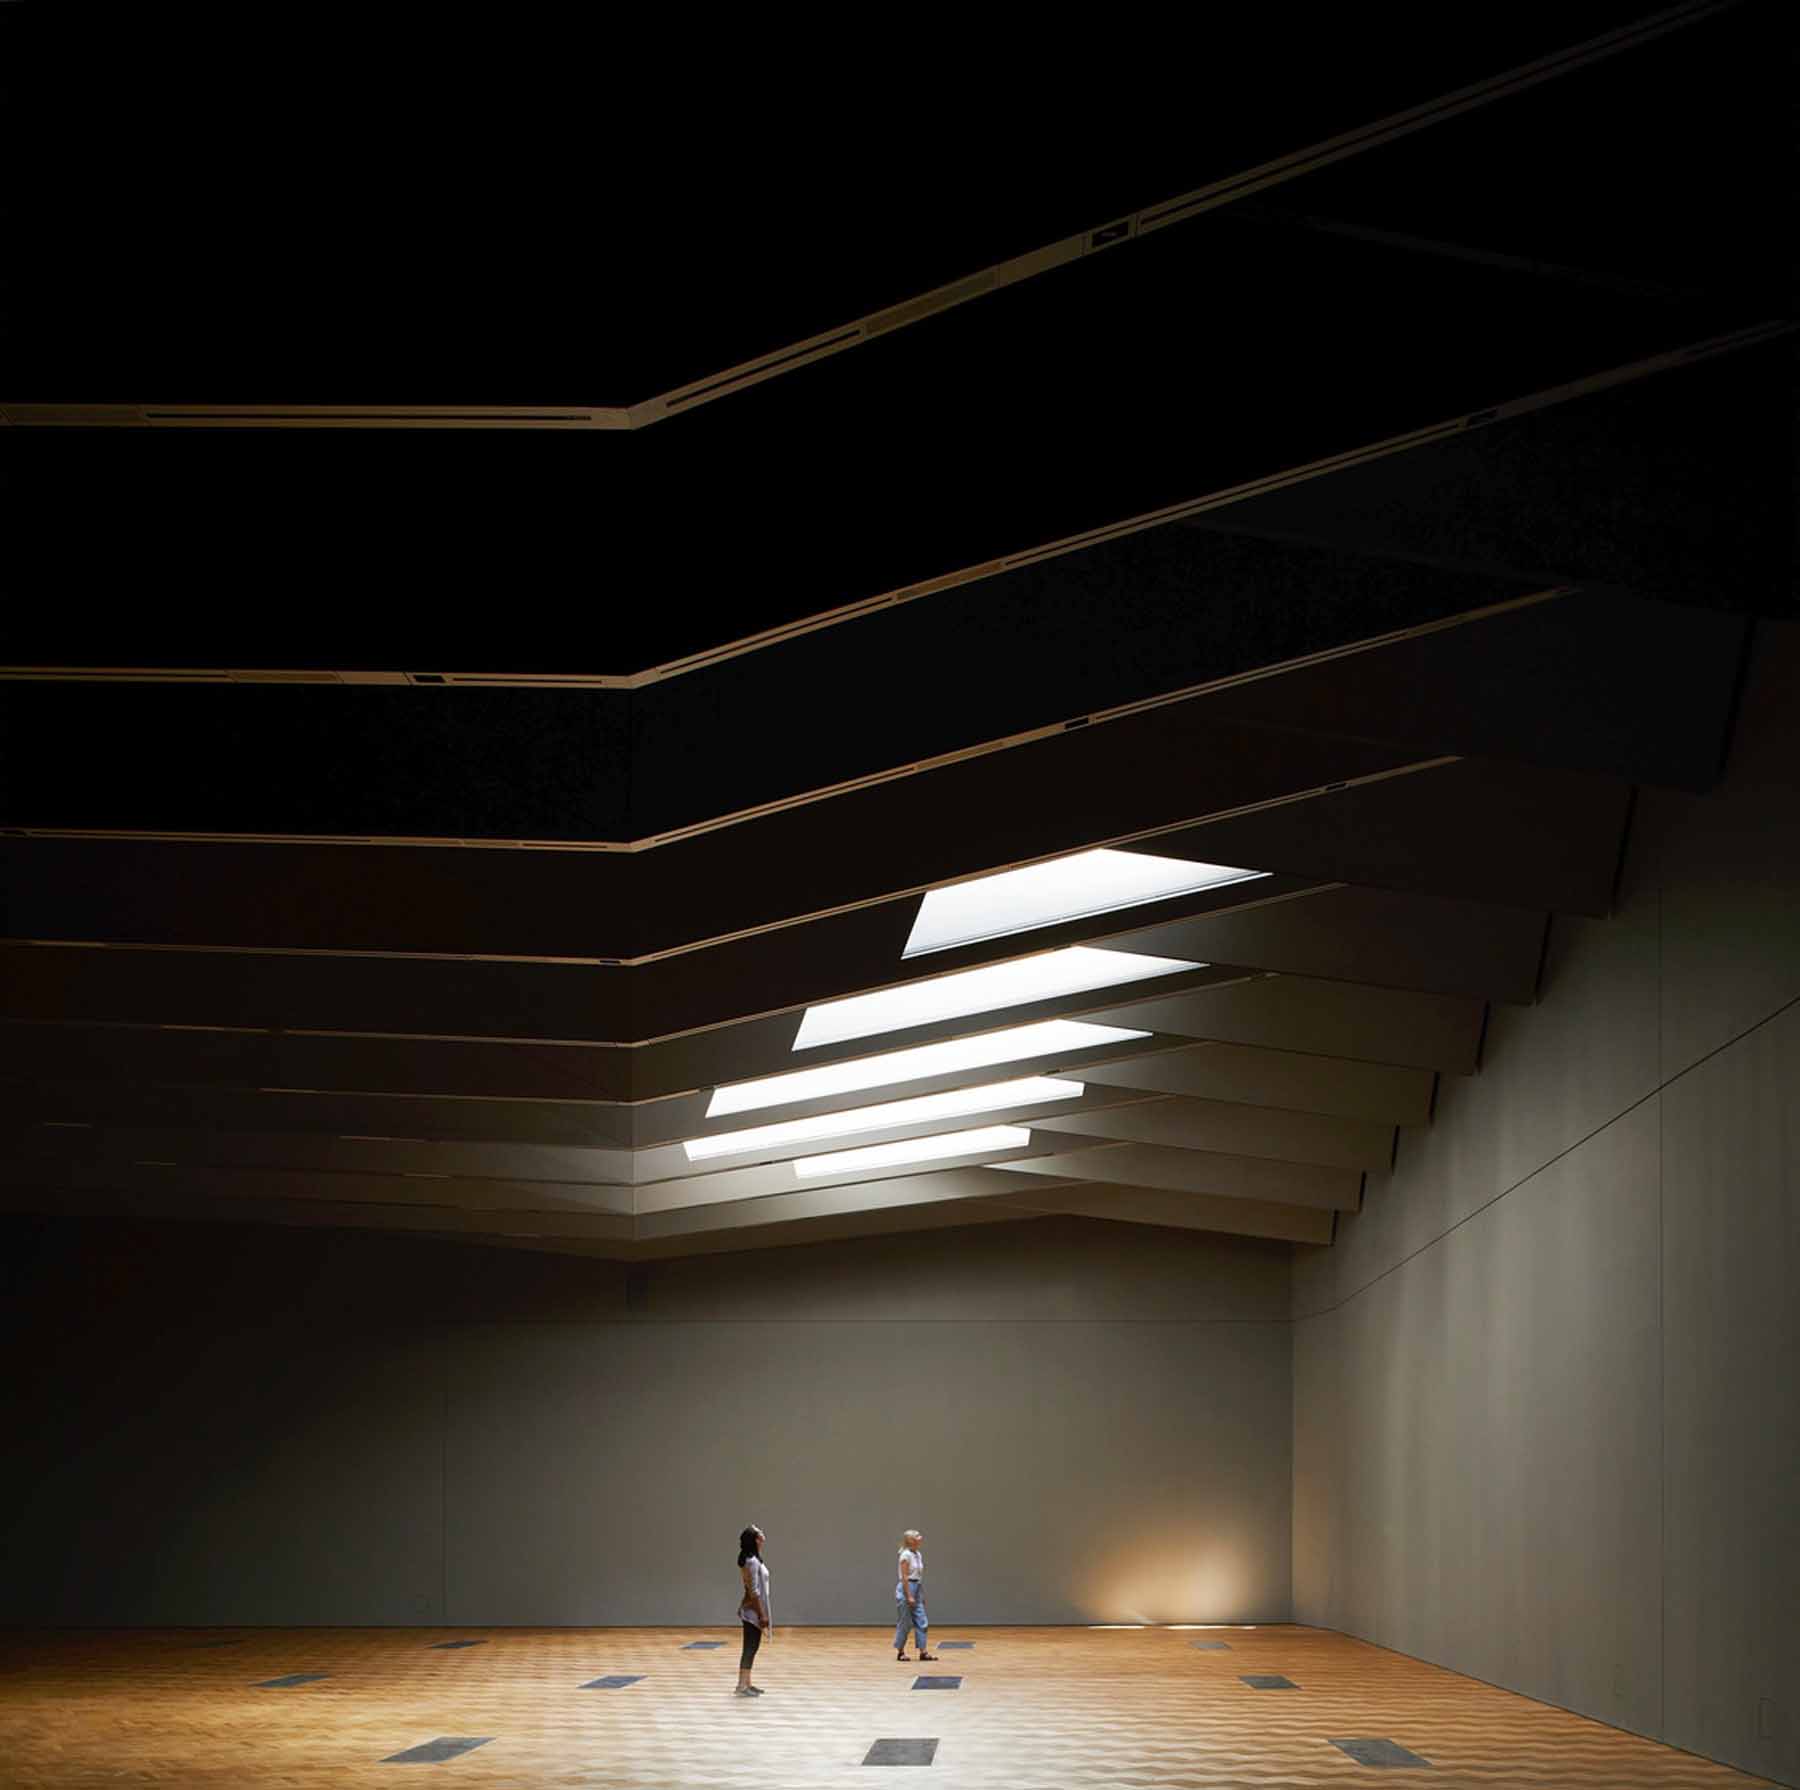 A New Subterranean Gallery For Temporary Exhibitions, The V&A, London By Amanda Levete Architects (AL_A), 2017